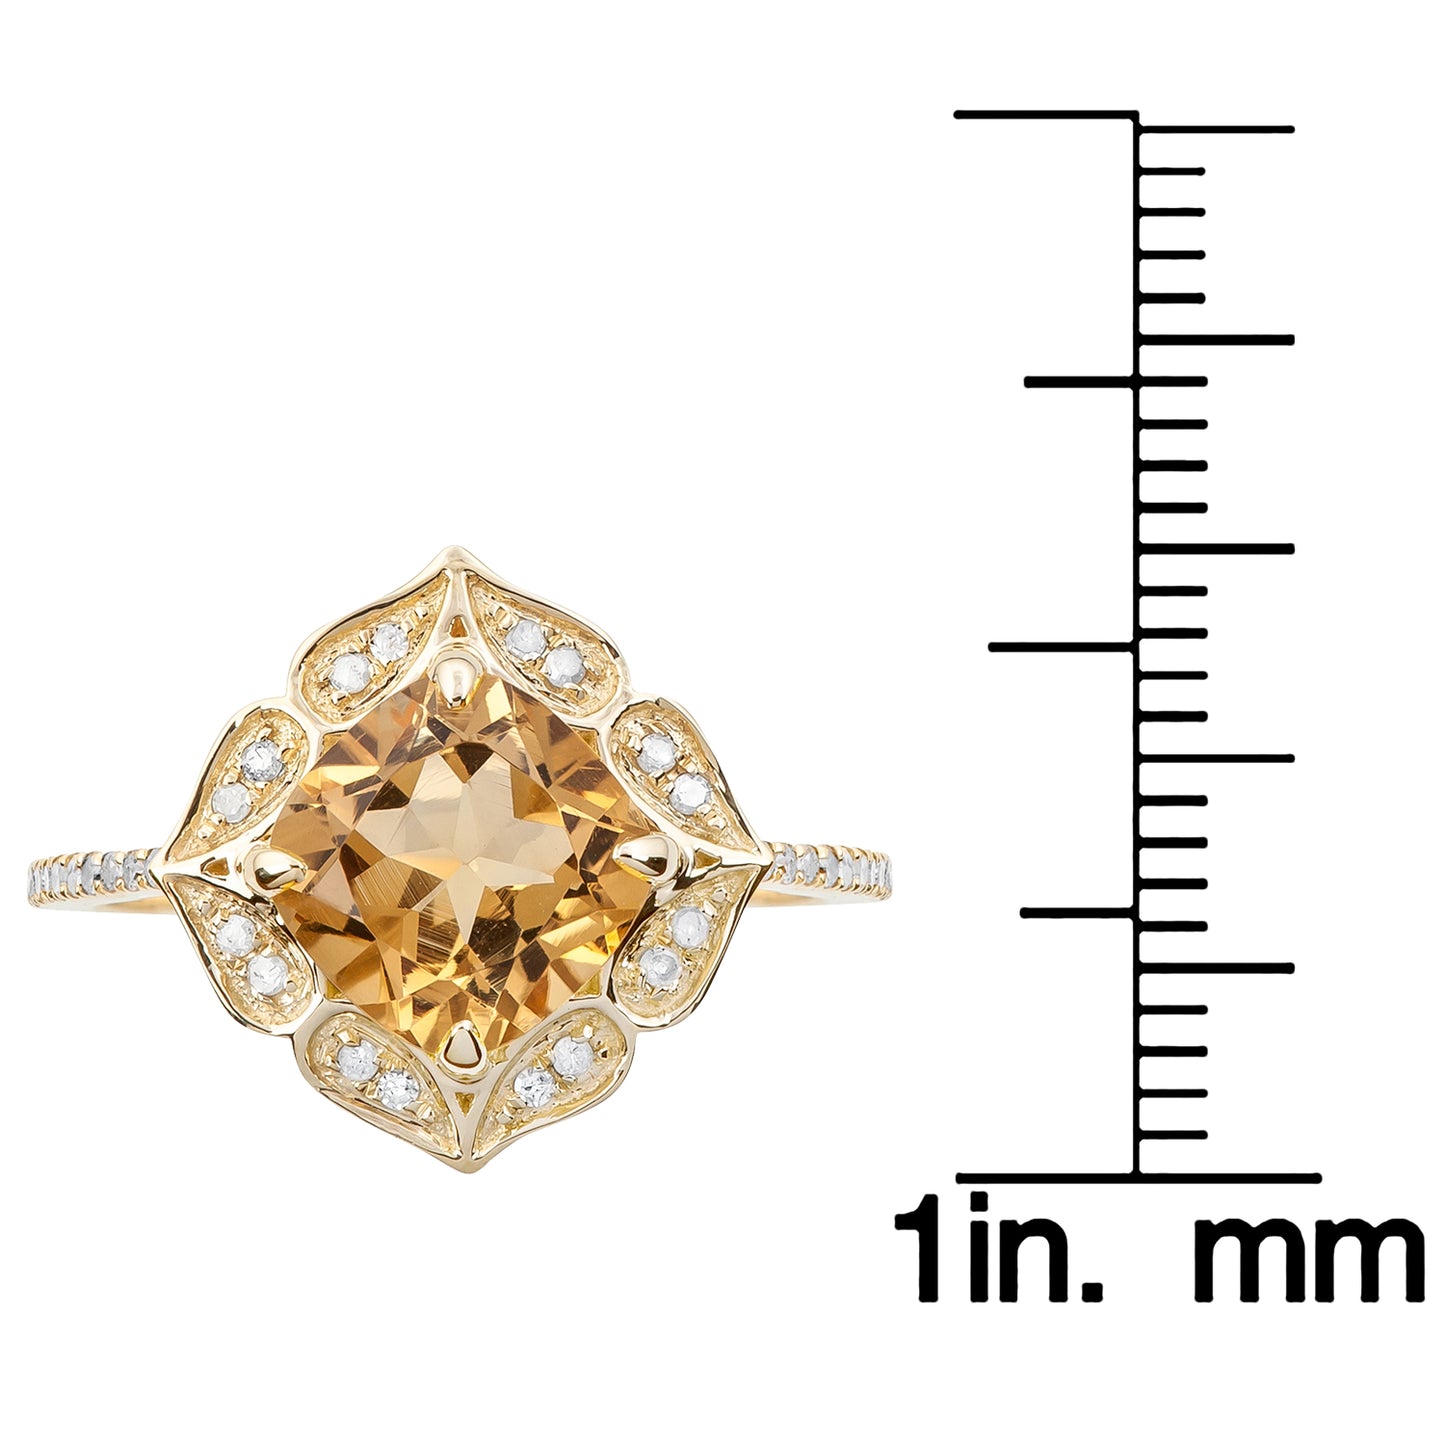 10k Yellow Gold Vintage Style Cushion Citrine and Diamond Ring